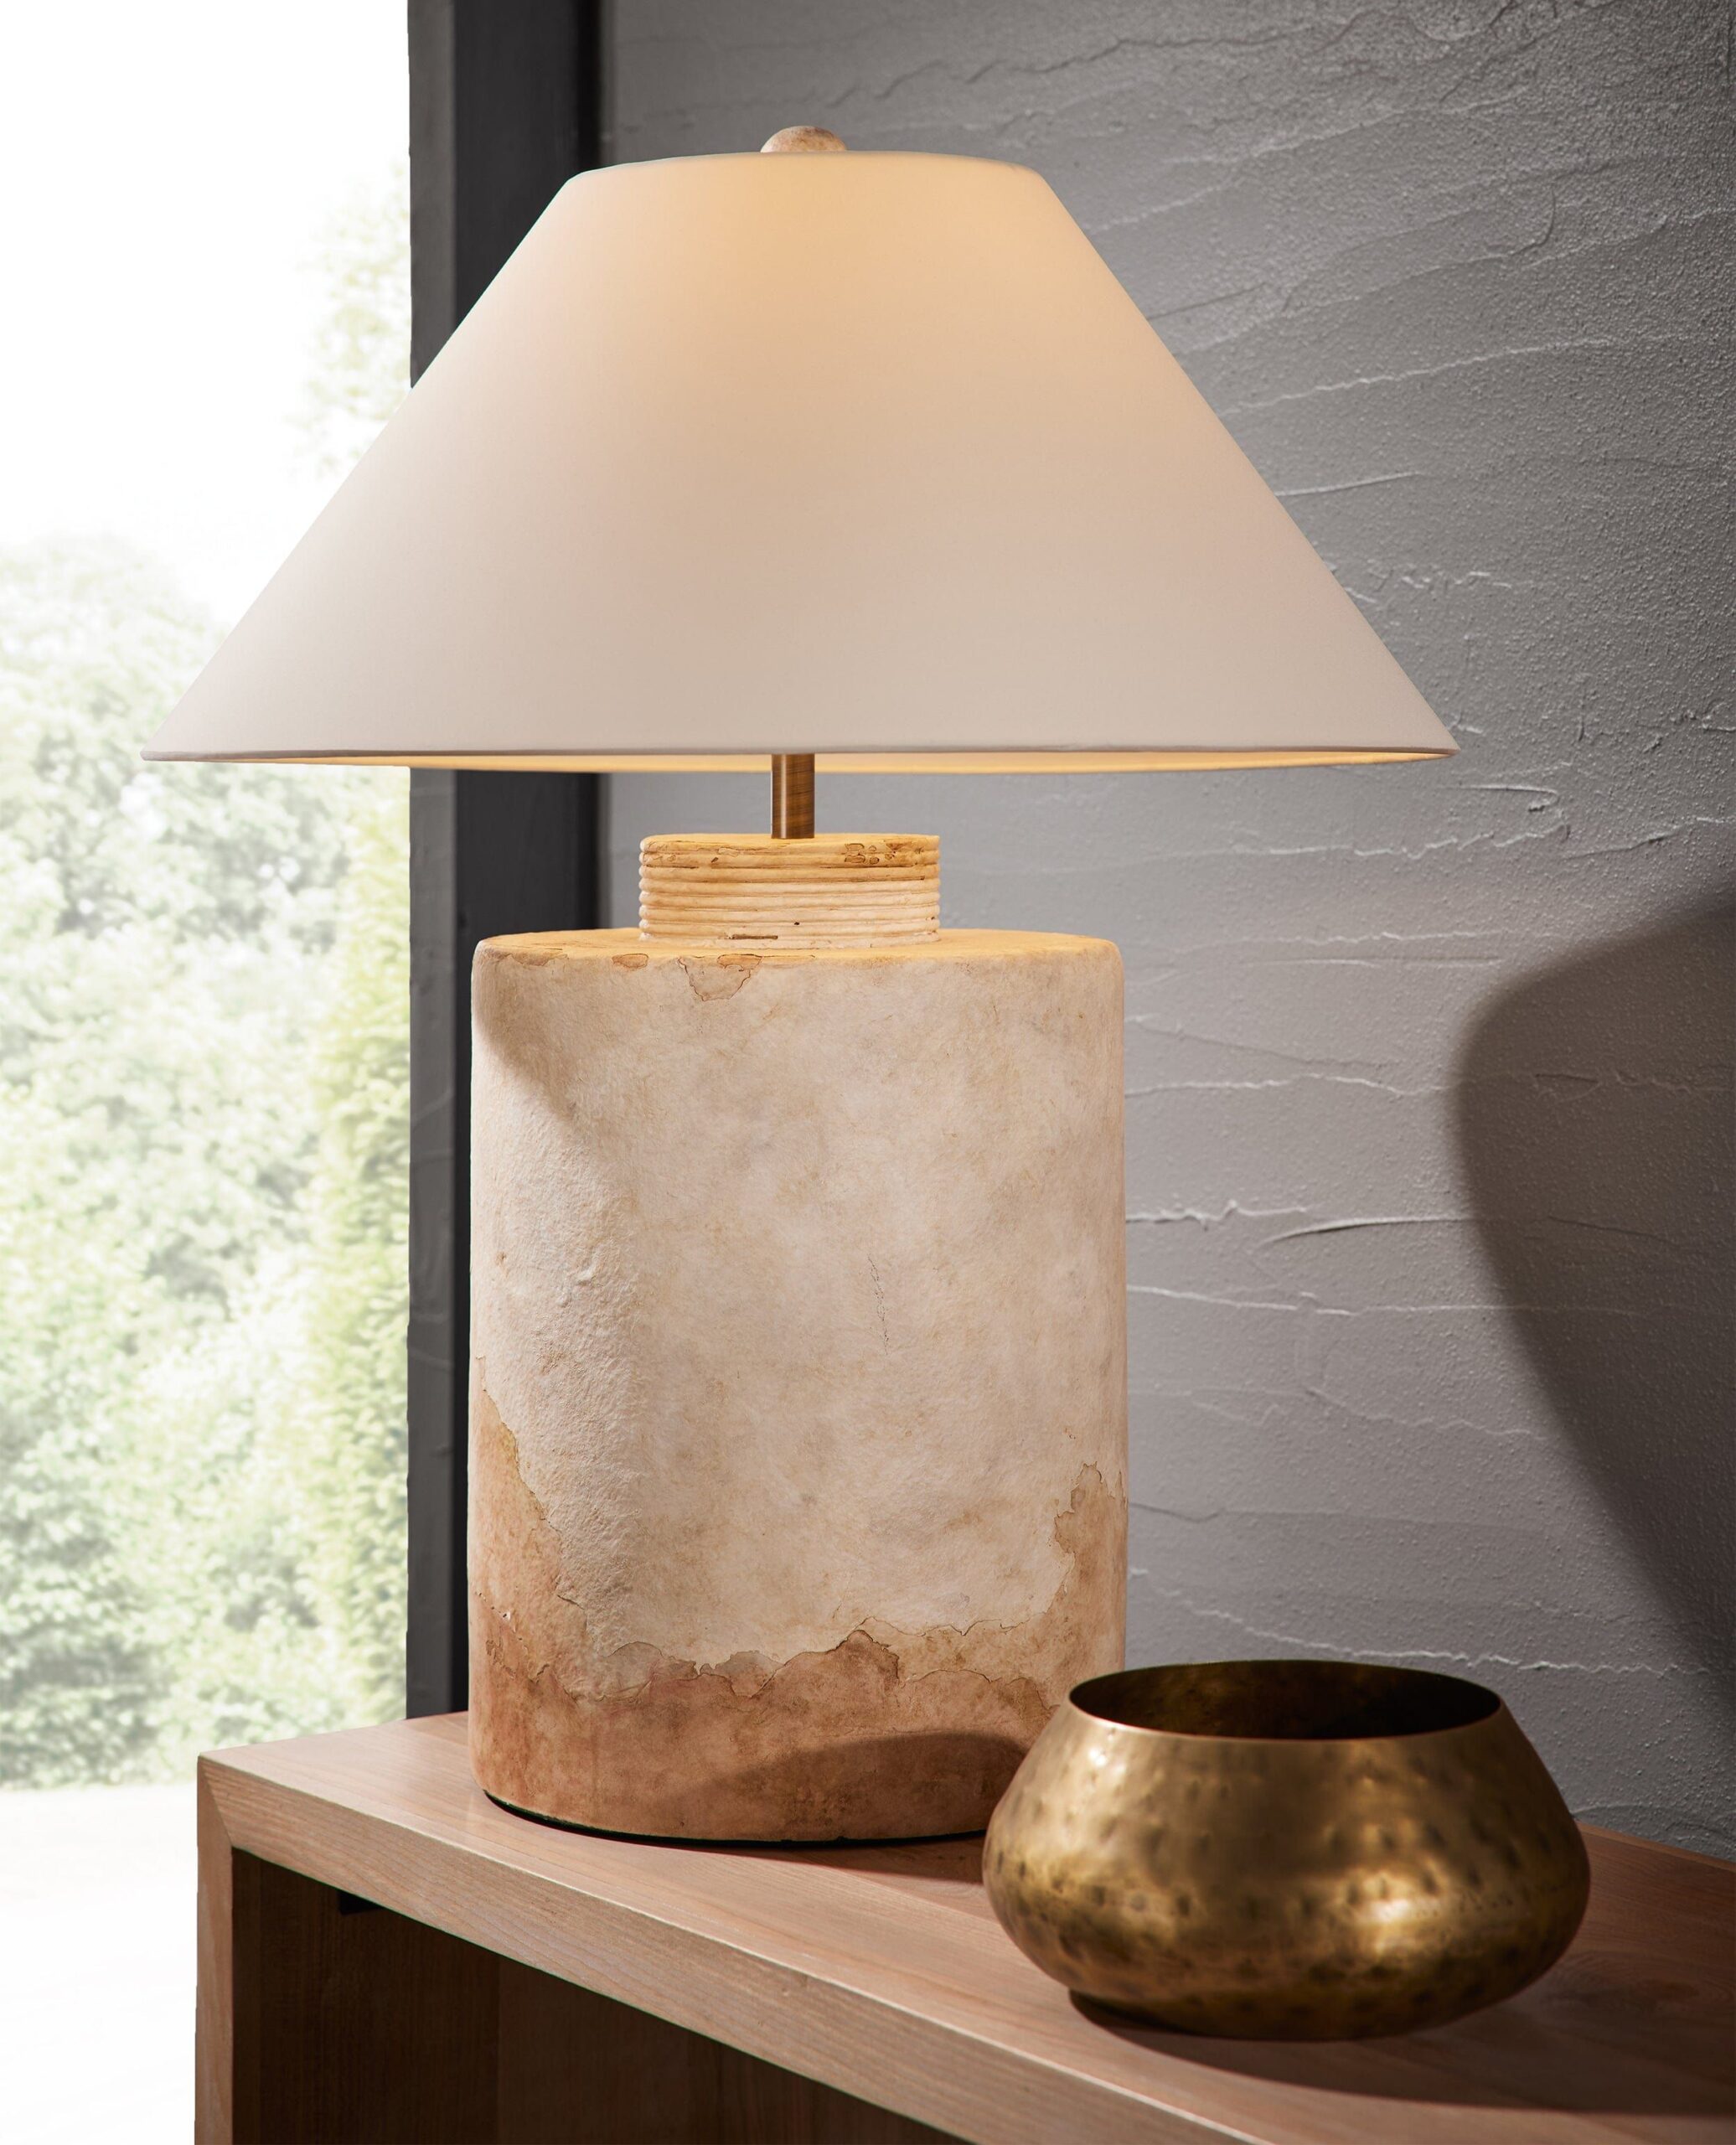 Rustic Table Lamps Design : A Guide to Beautiful Rustic Table Lamps Design for Your Home Décor